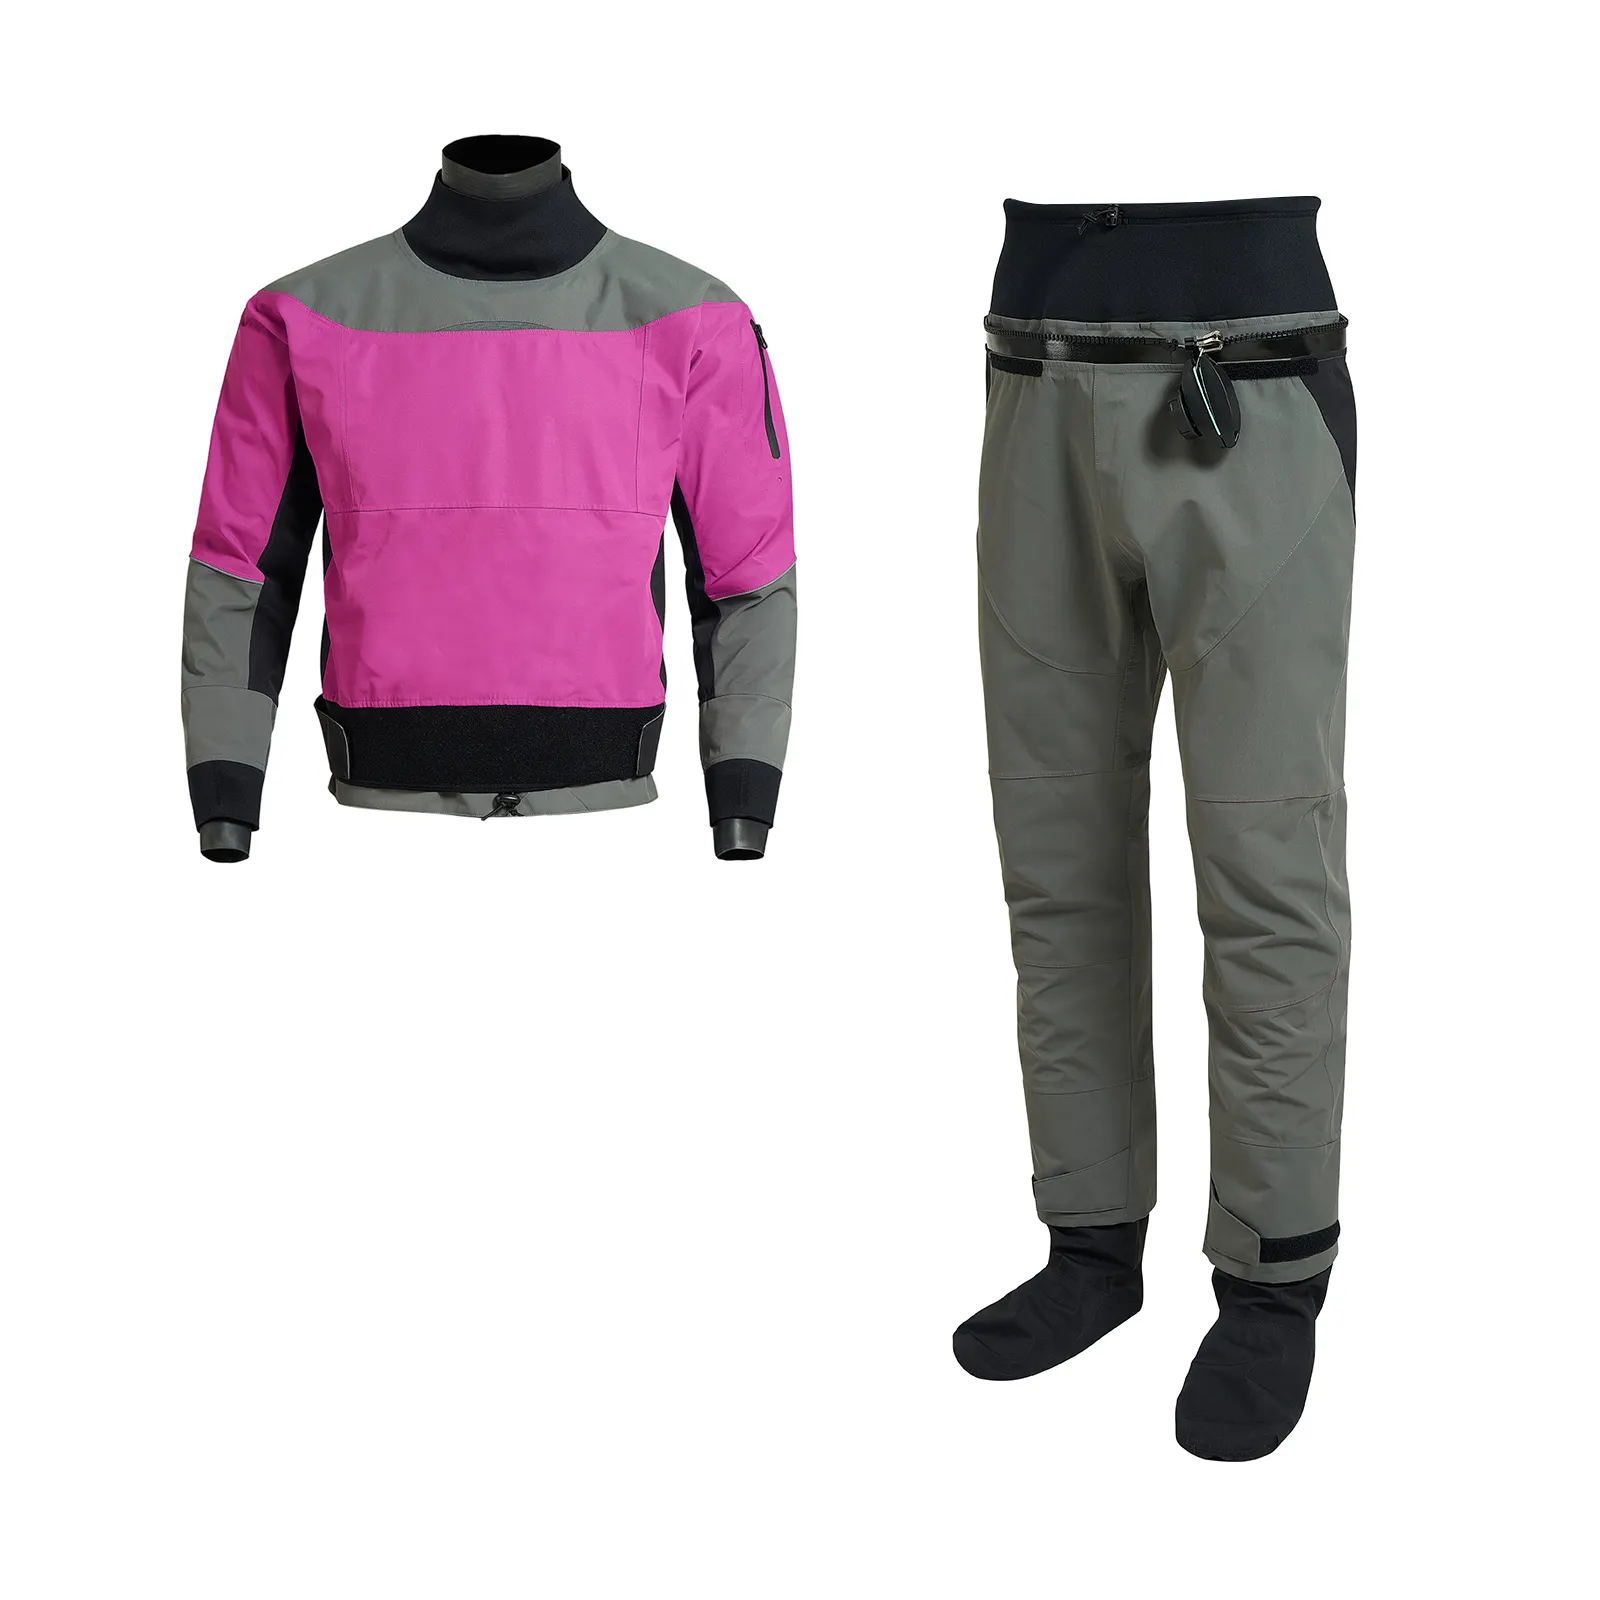 Two pieces Drysuit Jacket and Pant set Pending Dry suits for Kayak with Latex on Neck and Wrist White water Gaming